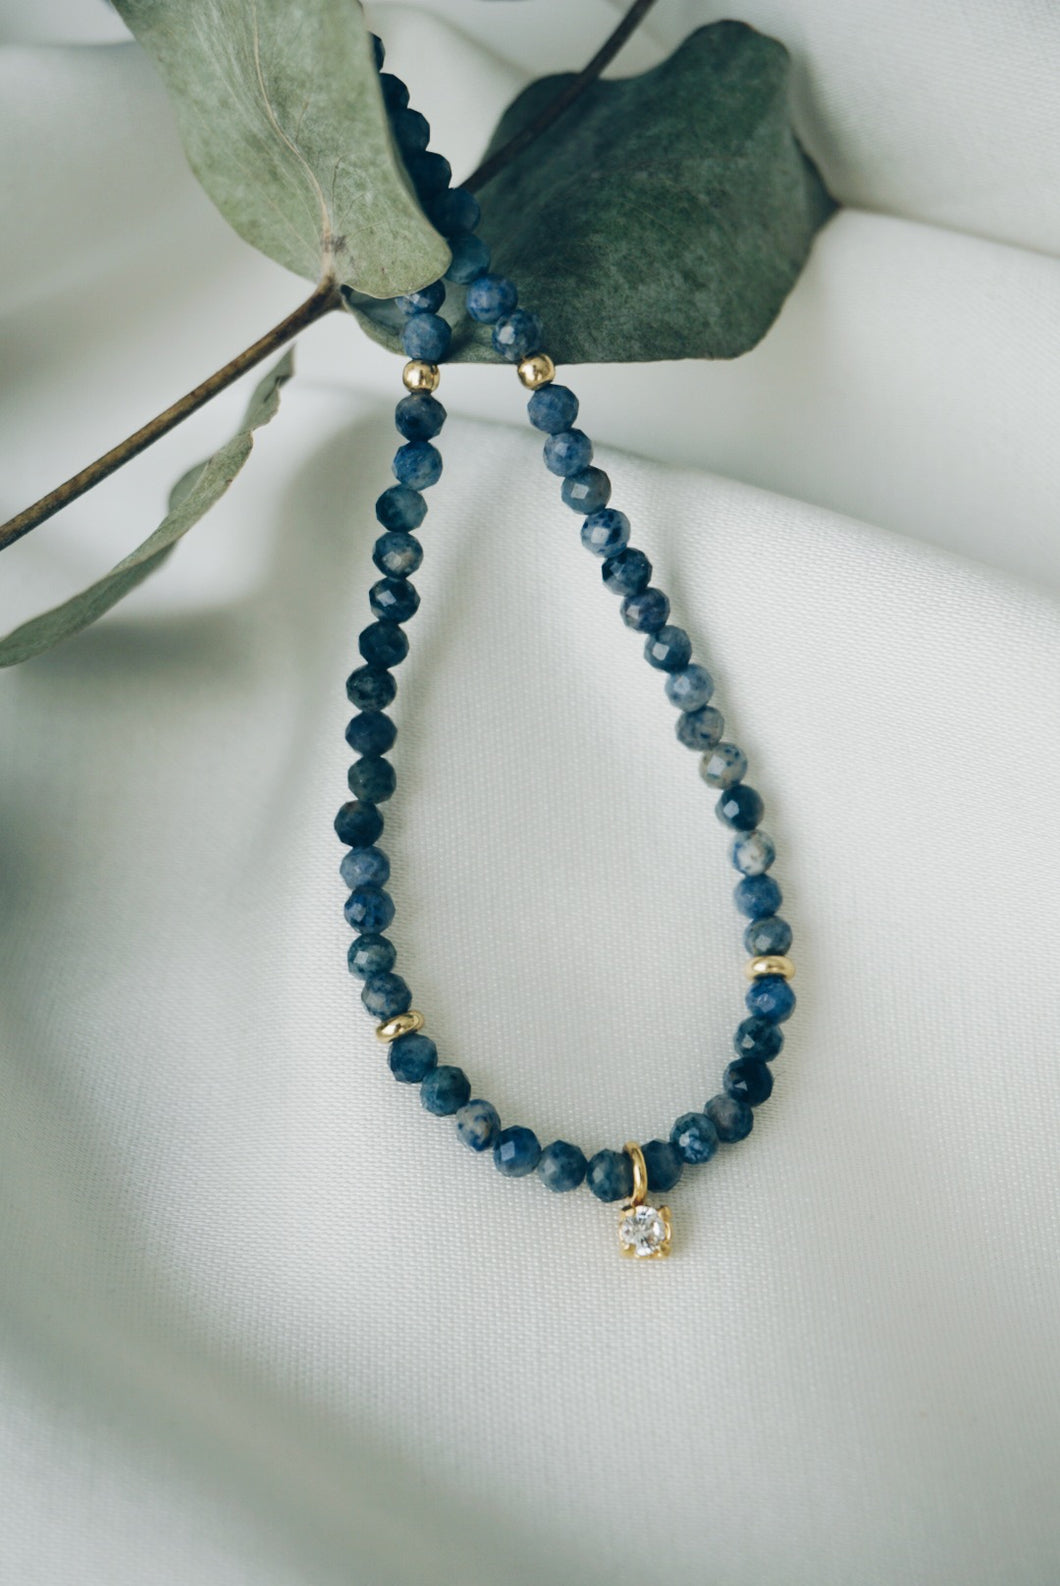 Crystal sapphire necklace